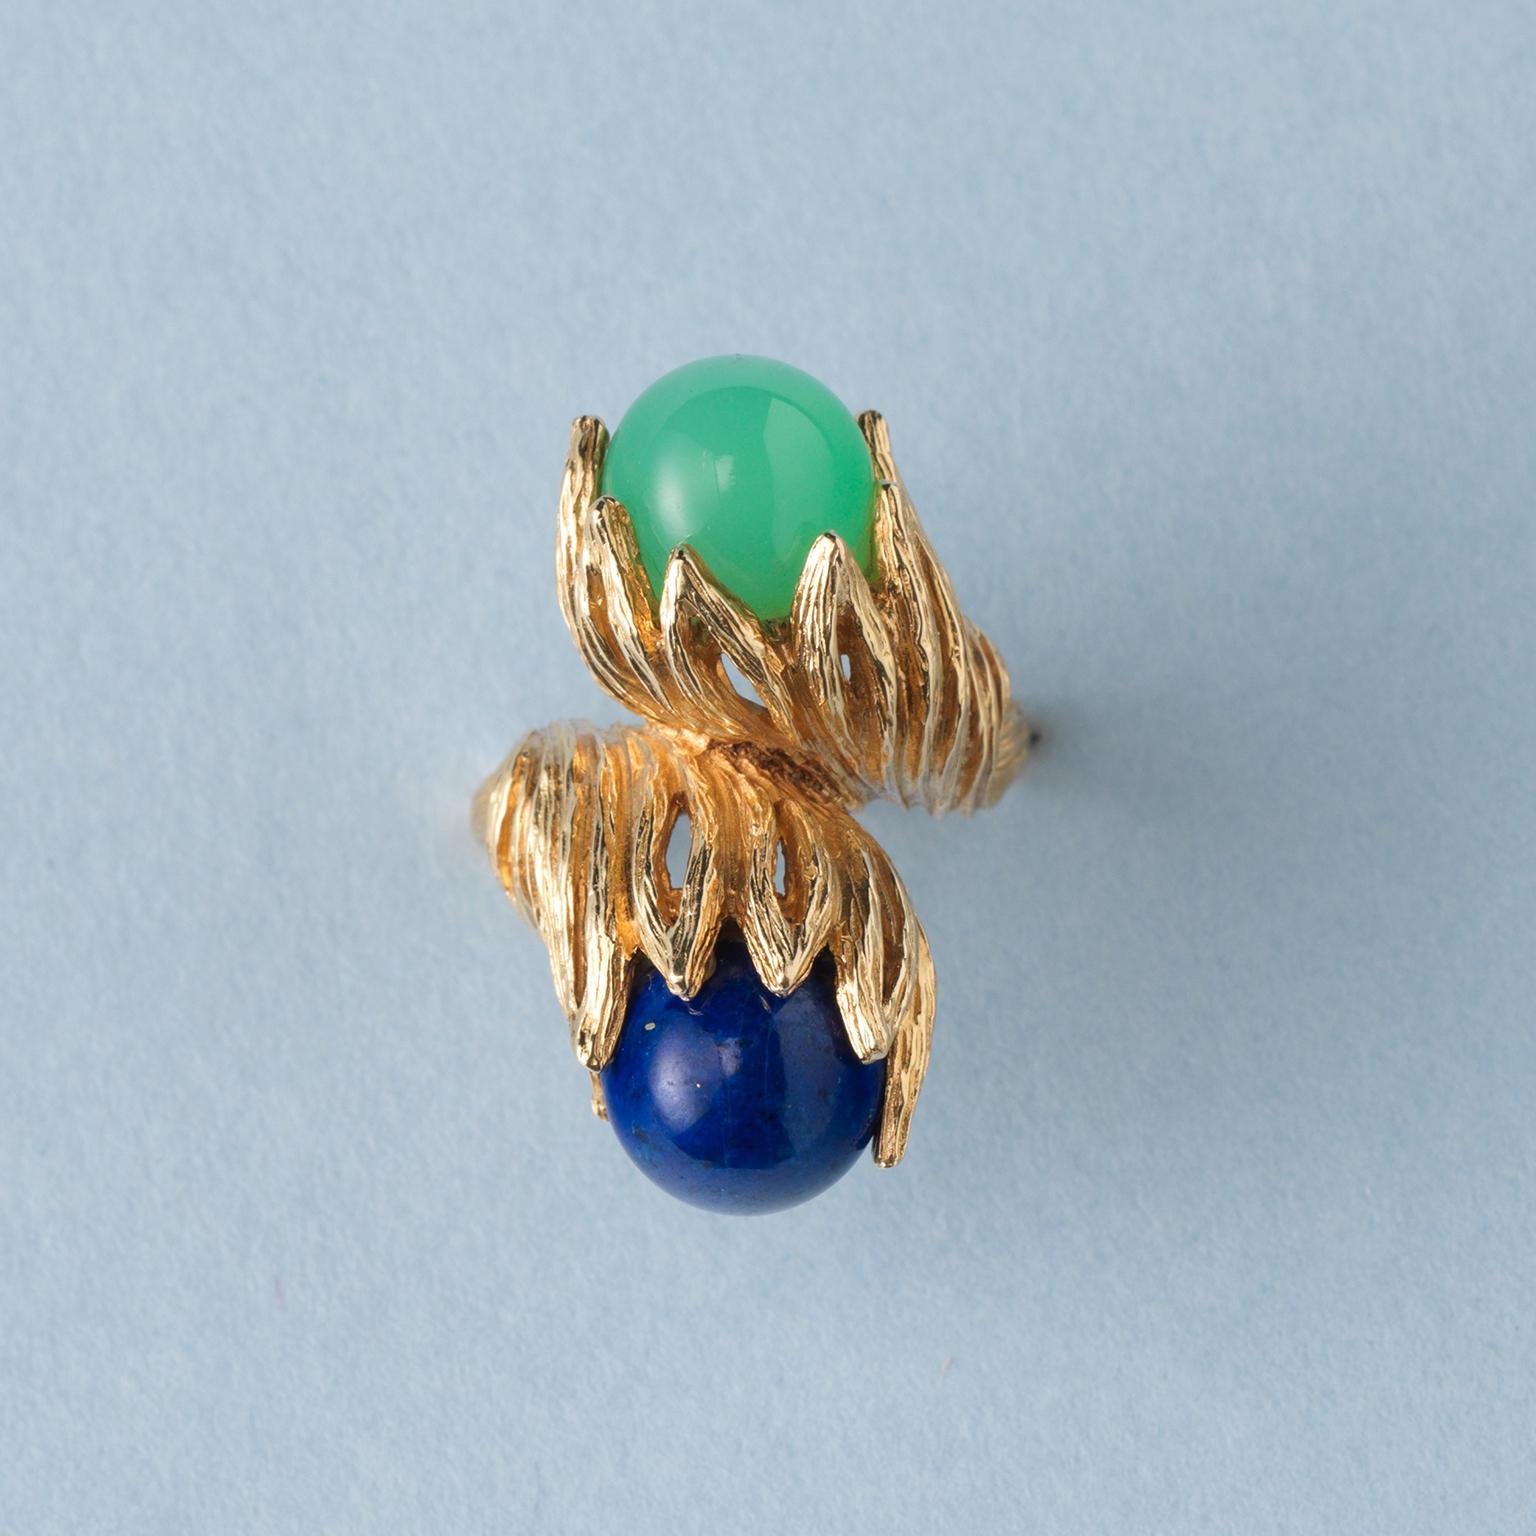 A sculptural 18 carat yellow gold ring with two textured leaves one is holding a lapis ball and one is set with a green calcedony ball, signed: Georg Lauer, Pforzheim, circa 1960-1970.

ring size: 16.5 mm / 6+ US.
weight: 18.13 grams
width: 2.1 – 30